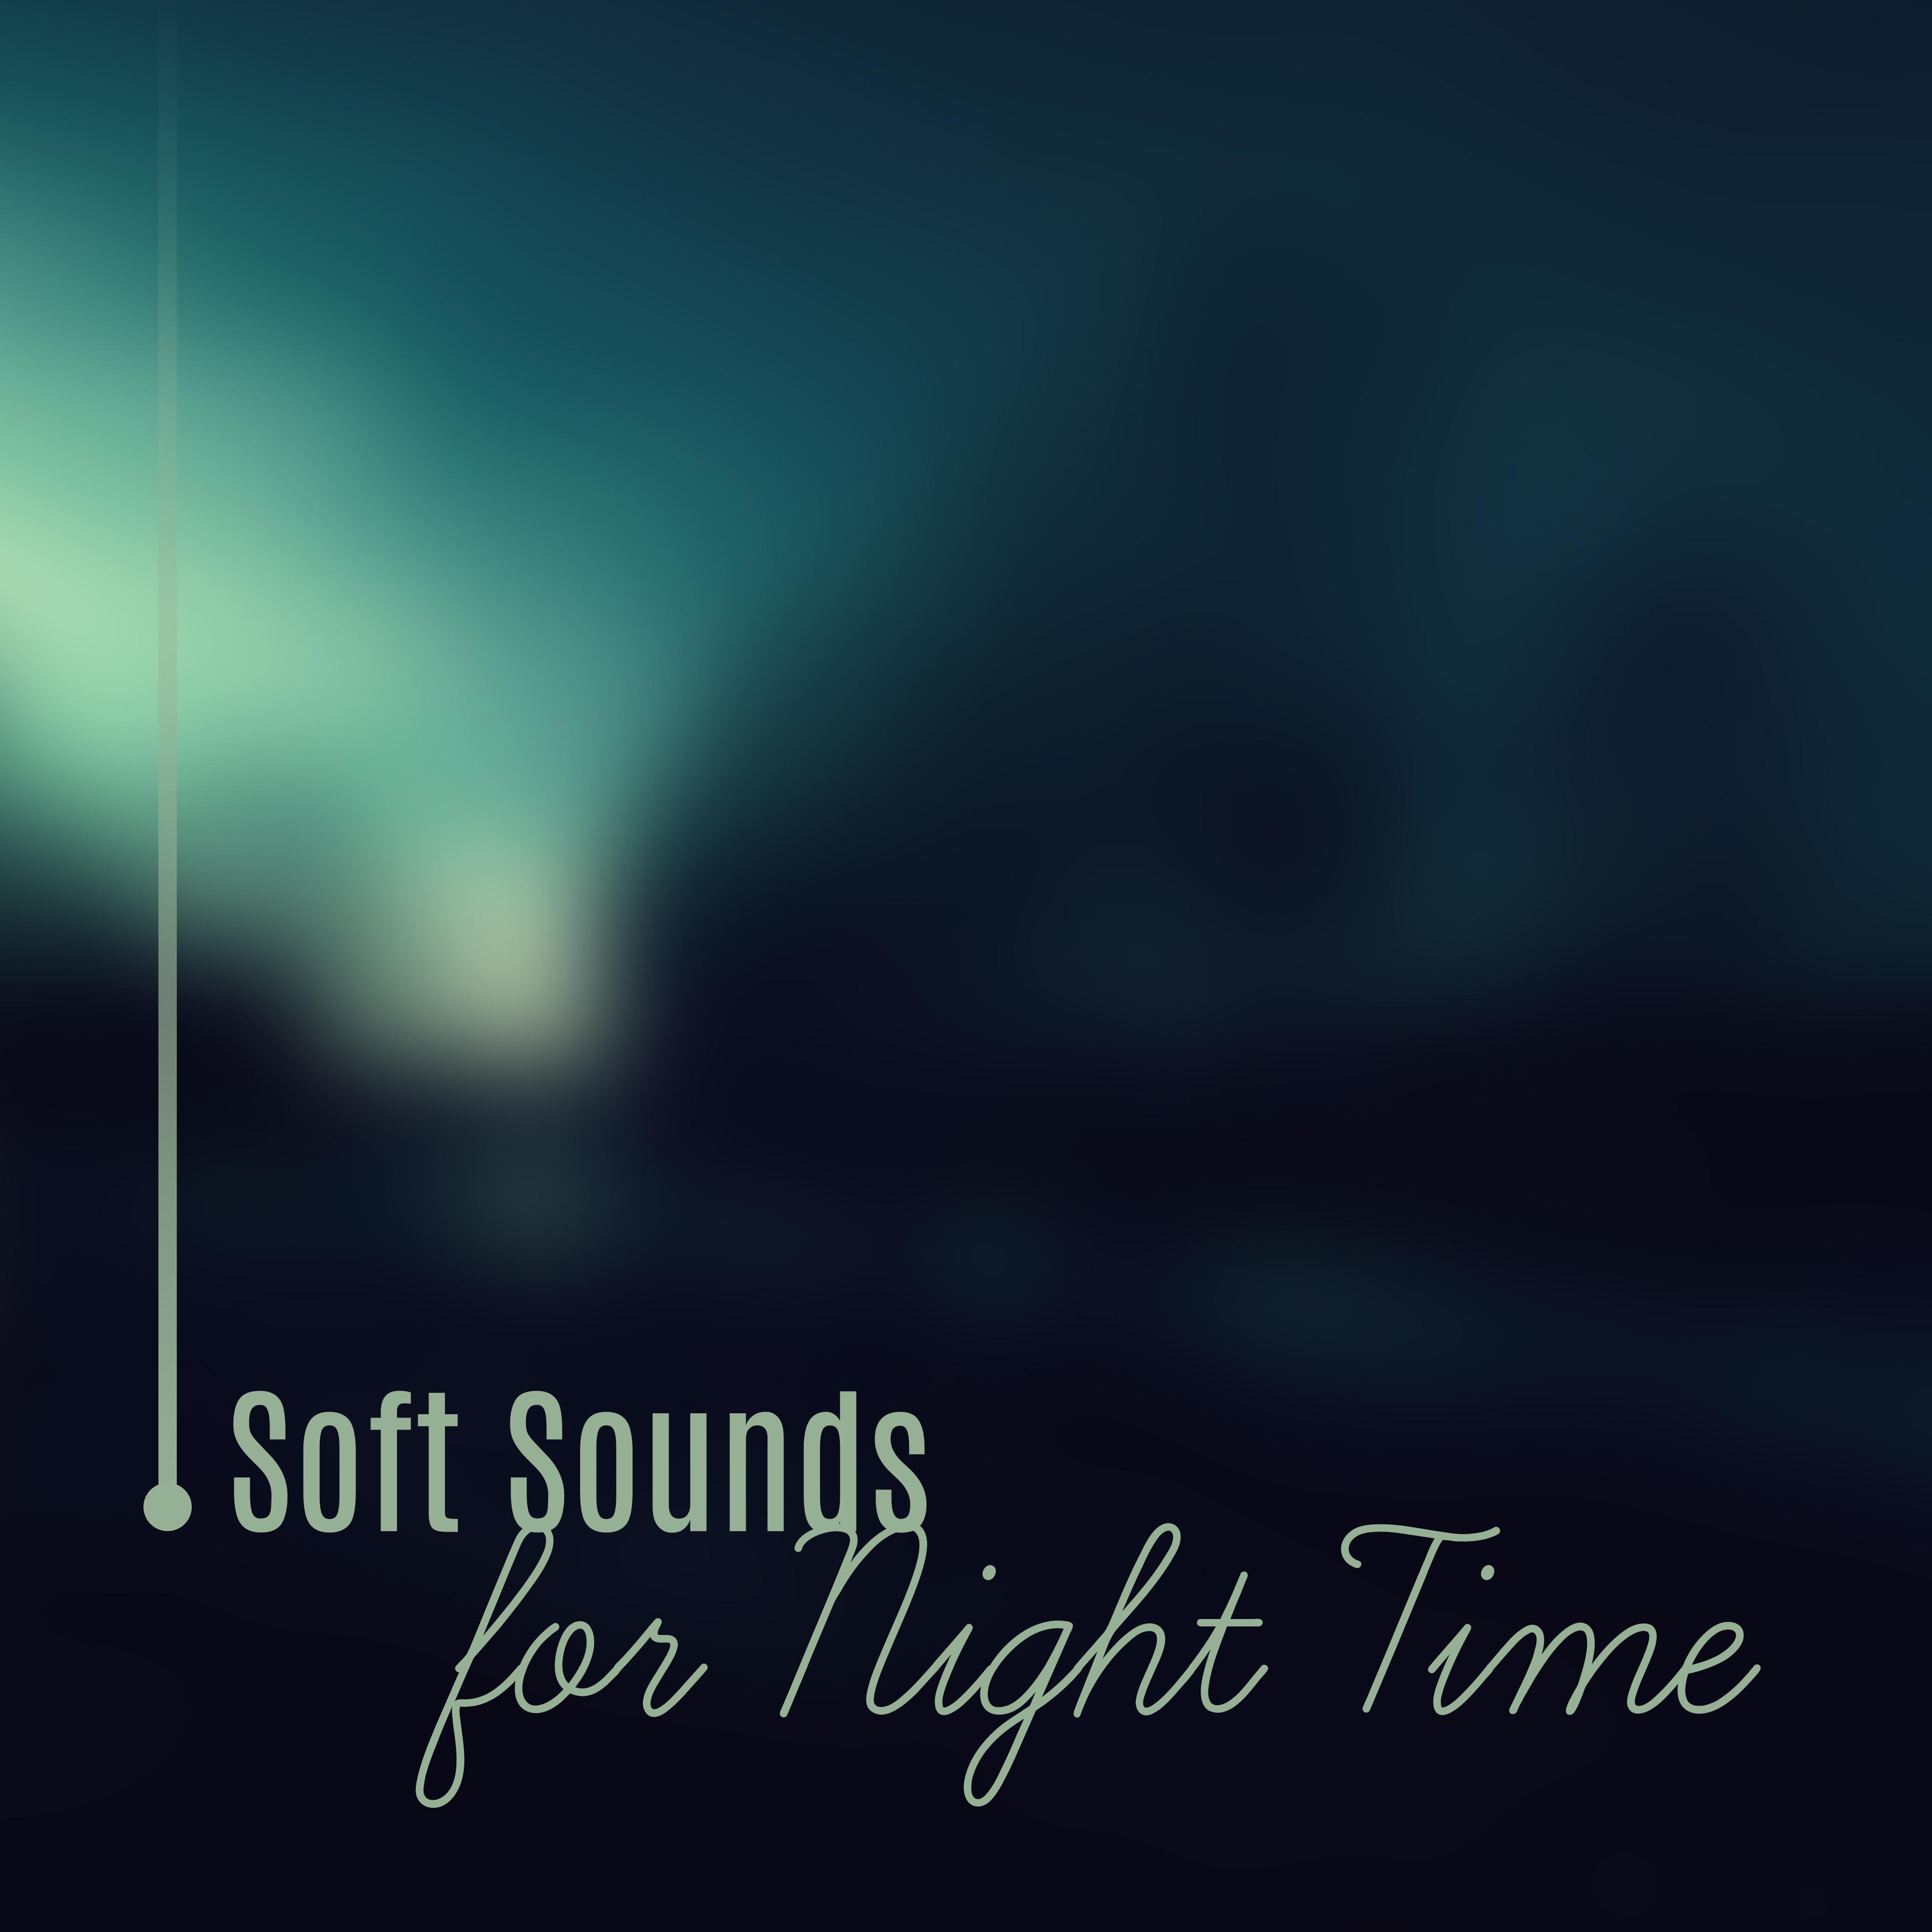 Soft Sounds for Night Time  Relaxing Music, Sounds to Rest, Sleep Well, Sweet Dreams